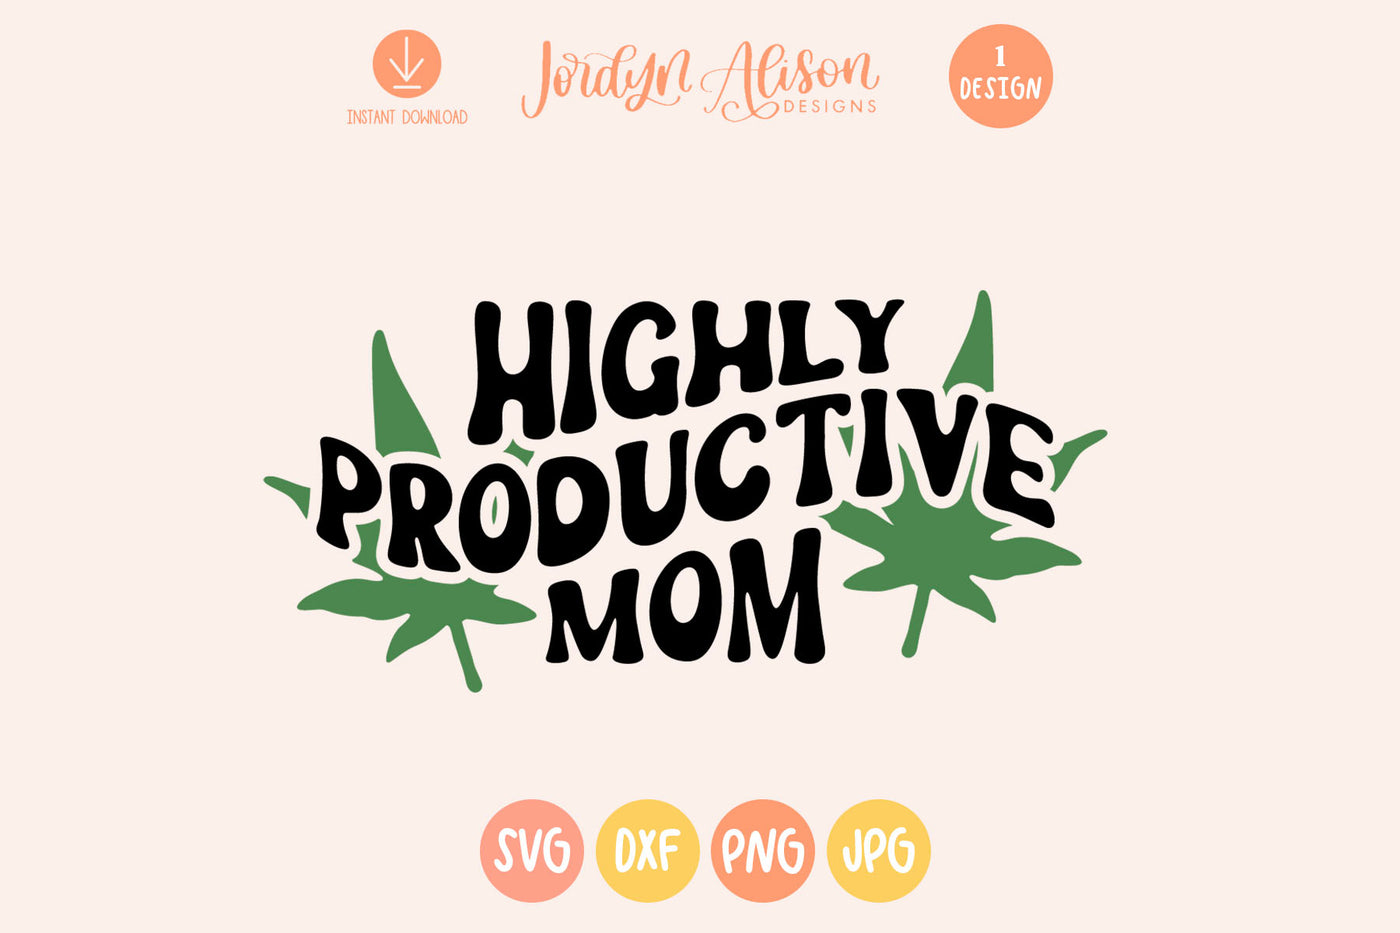 Highly Productive Mom SVG